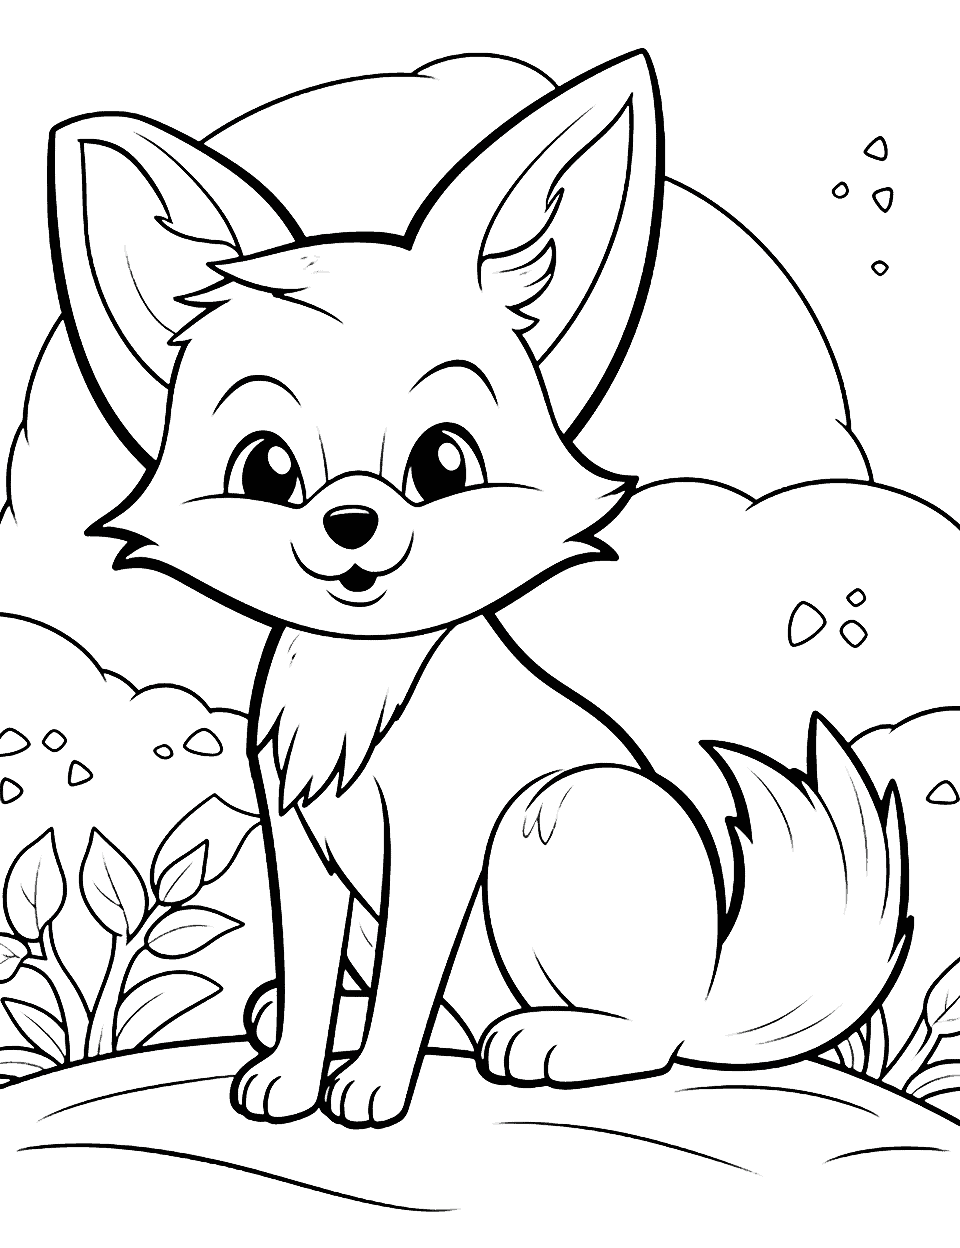 Wise Fox Animal Coloring Page - A clever fox sitting in a thoughtful pose, surrounded by a forest backdrop.